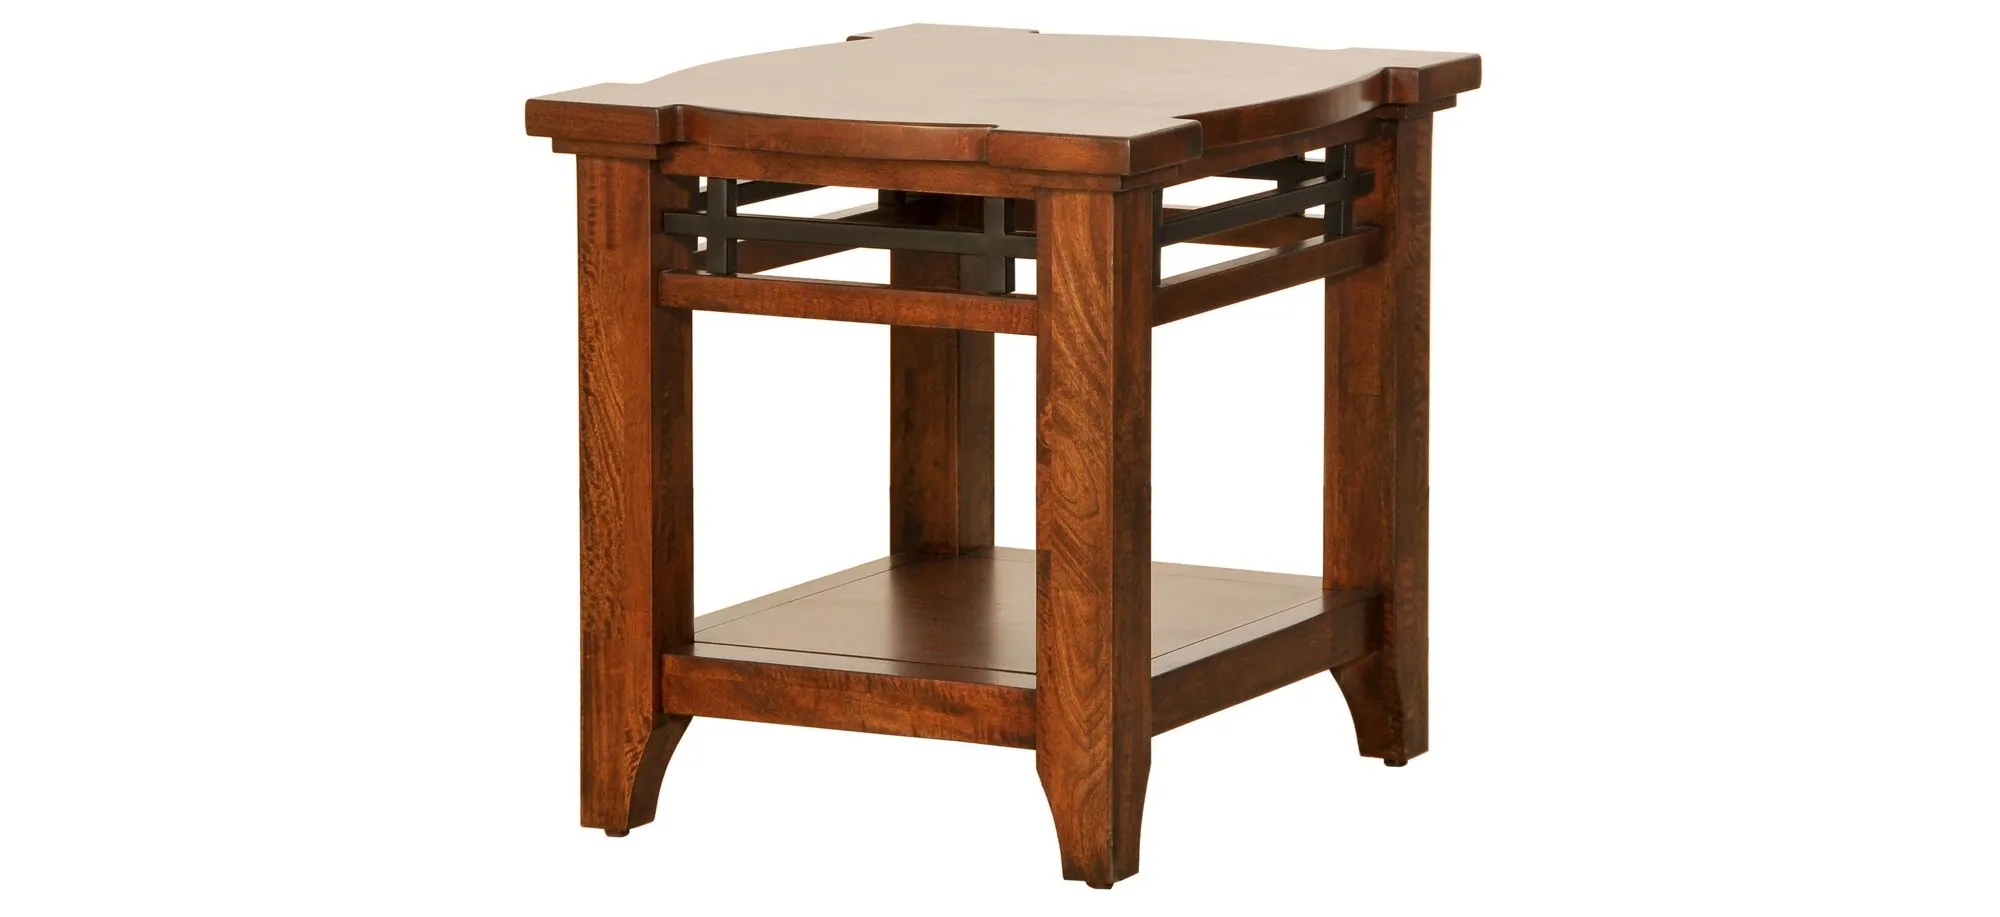 Whistler Lamp table in Walnut by Napa Furniture Design